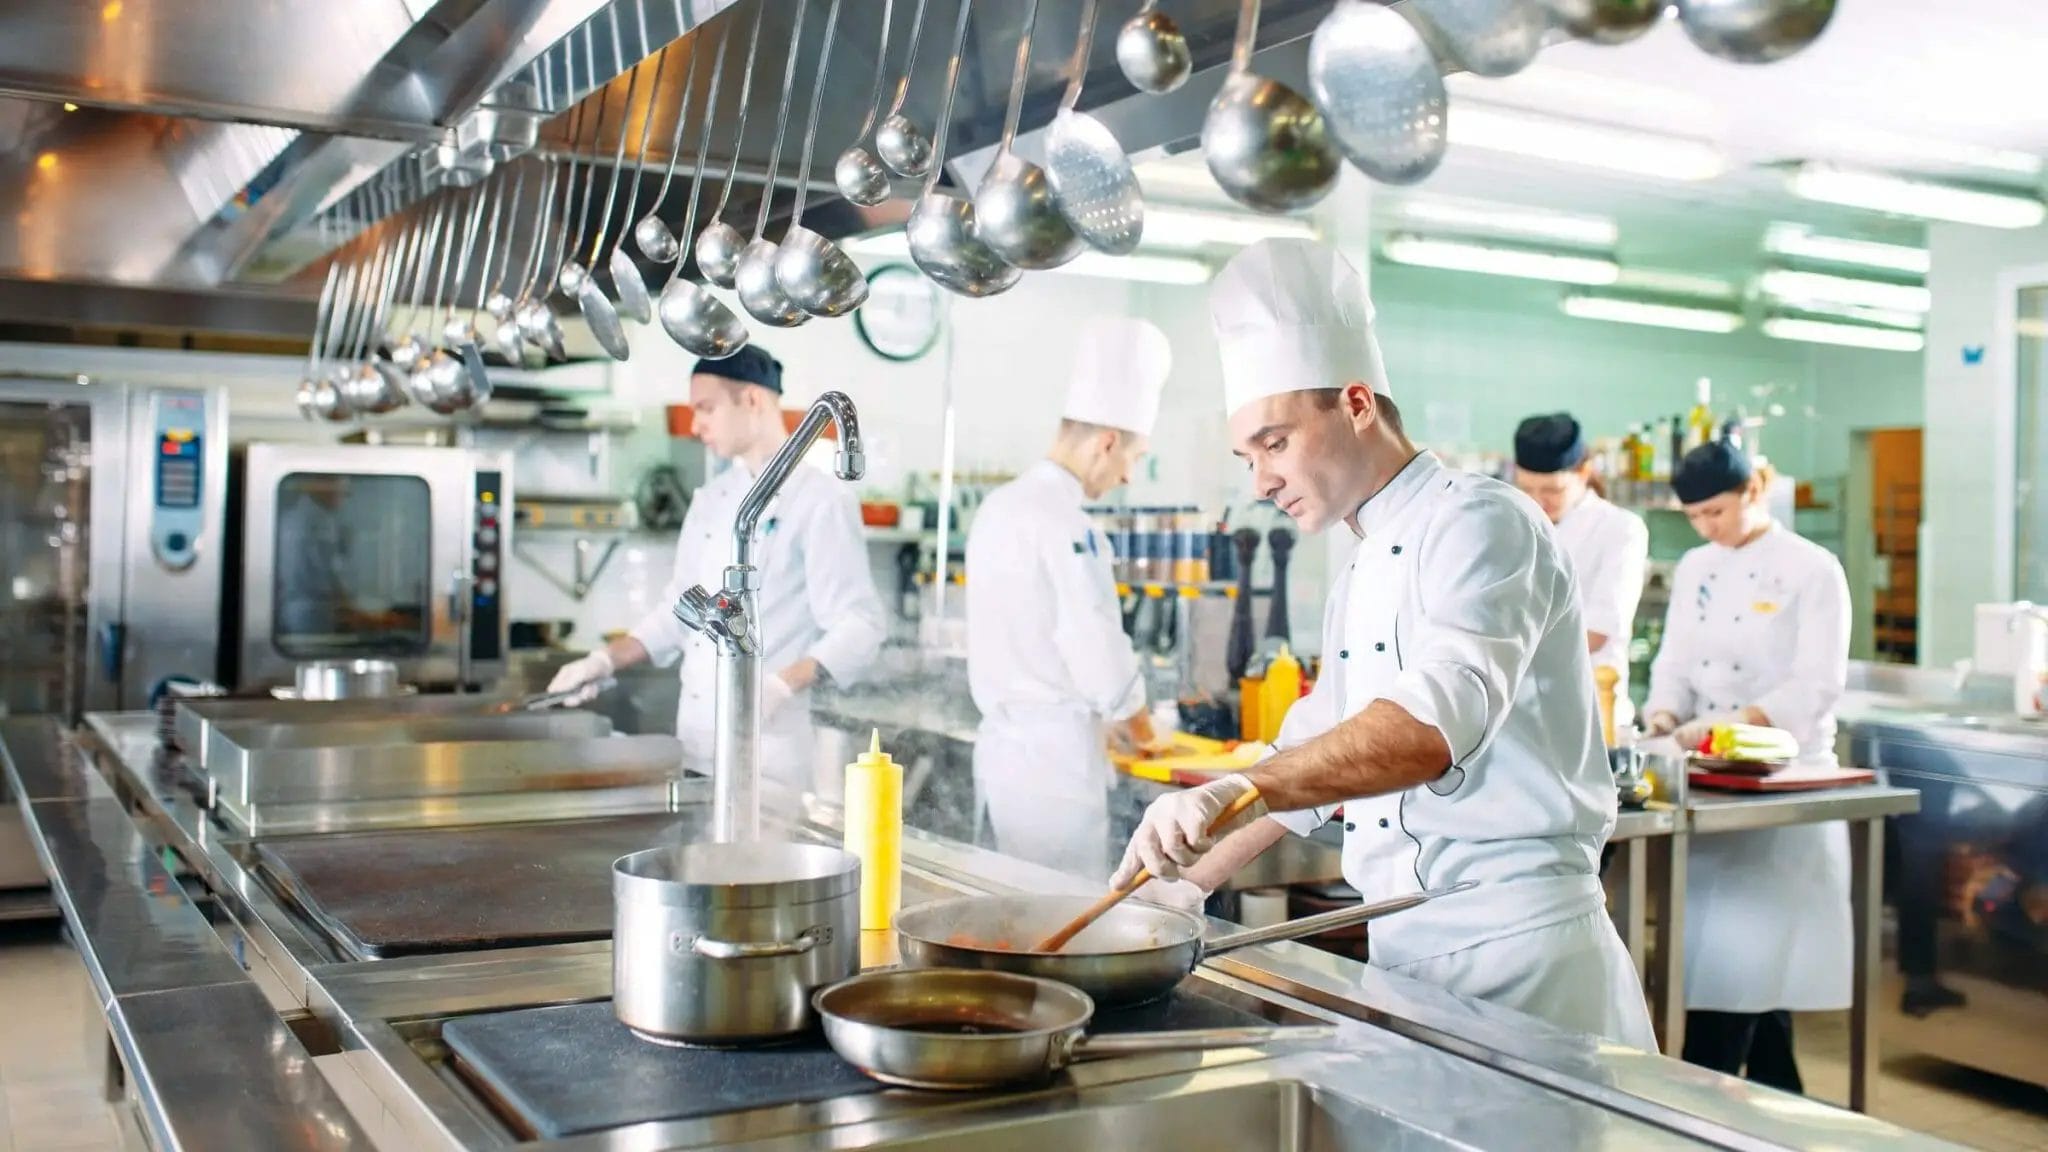 Commercial kitchen with multiple people cooking